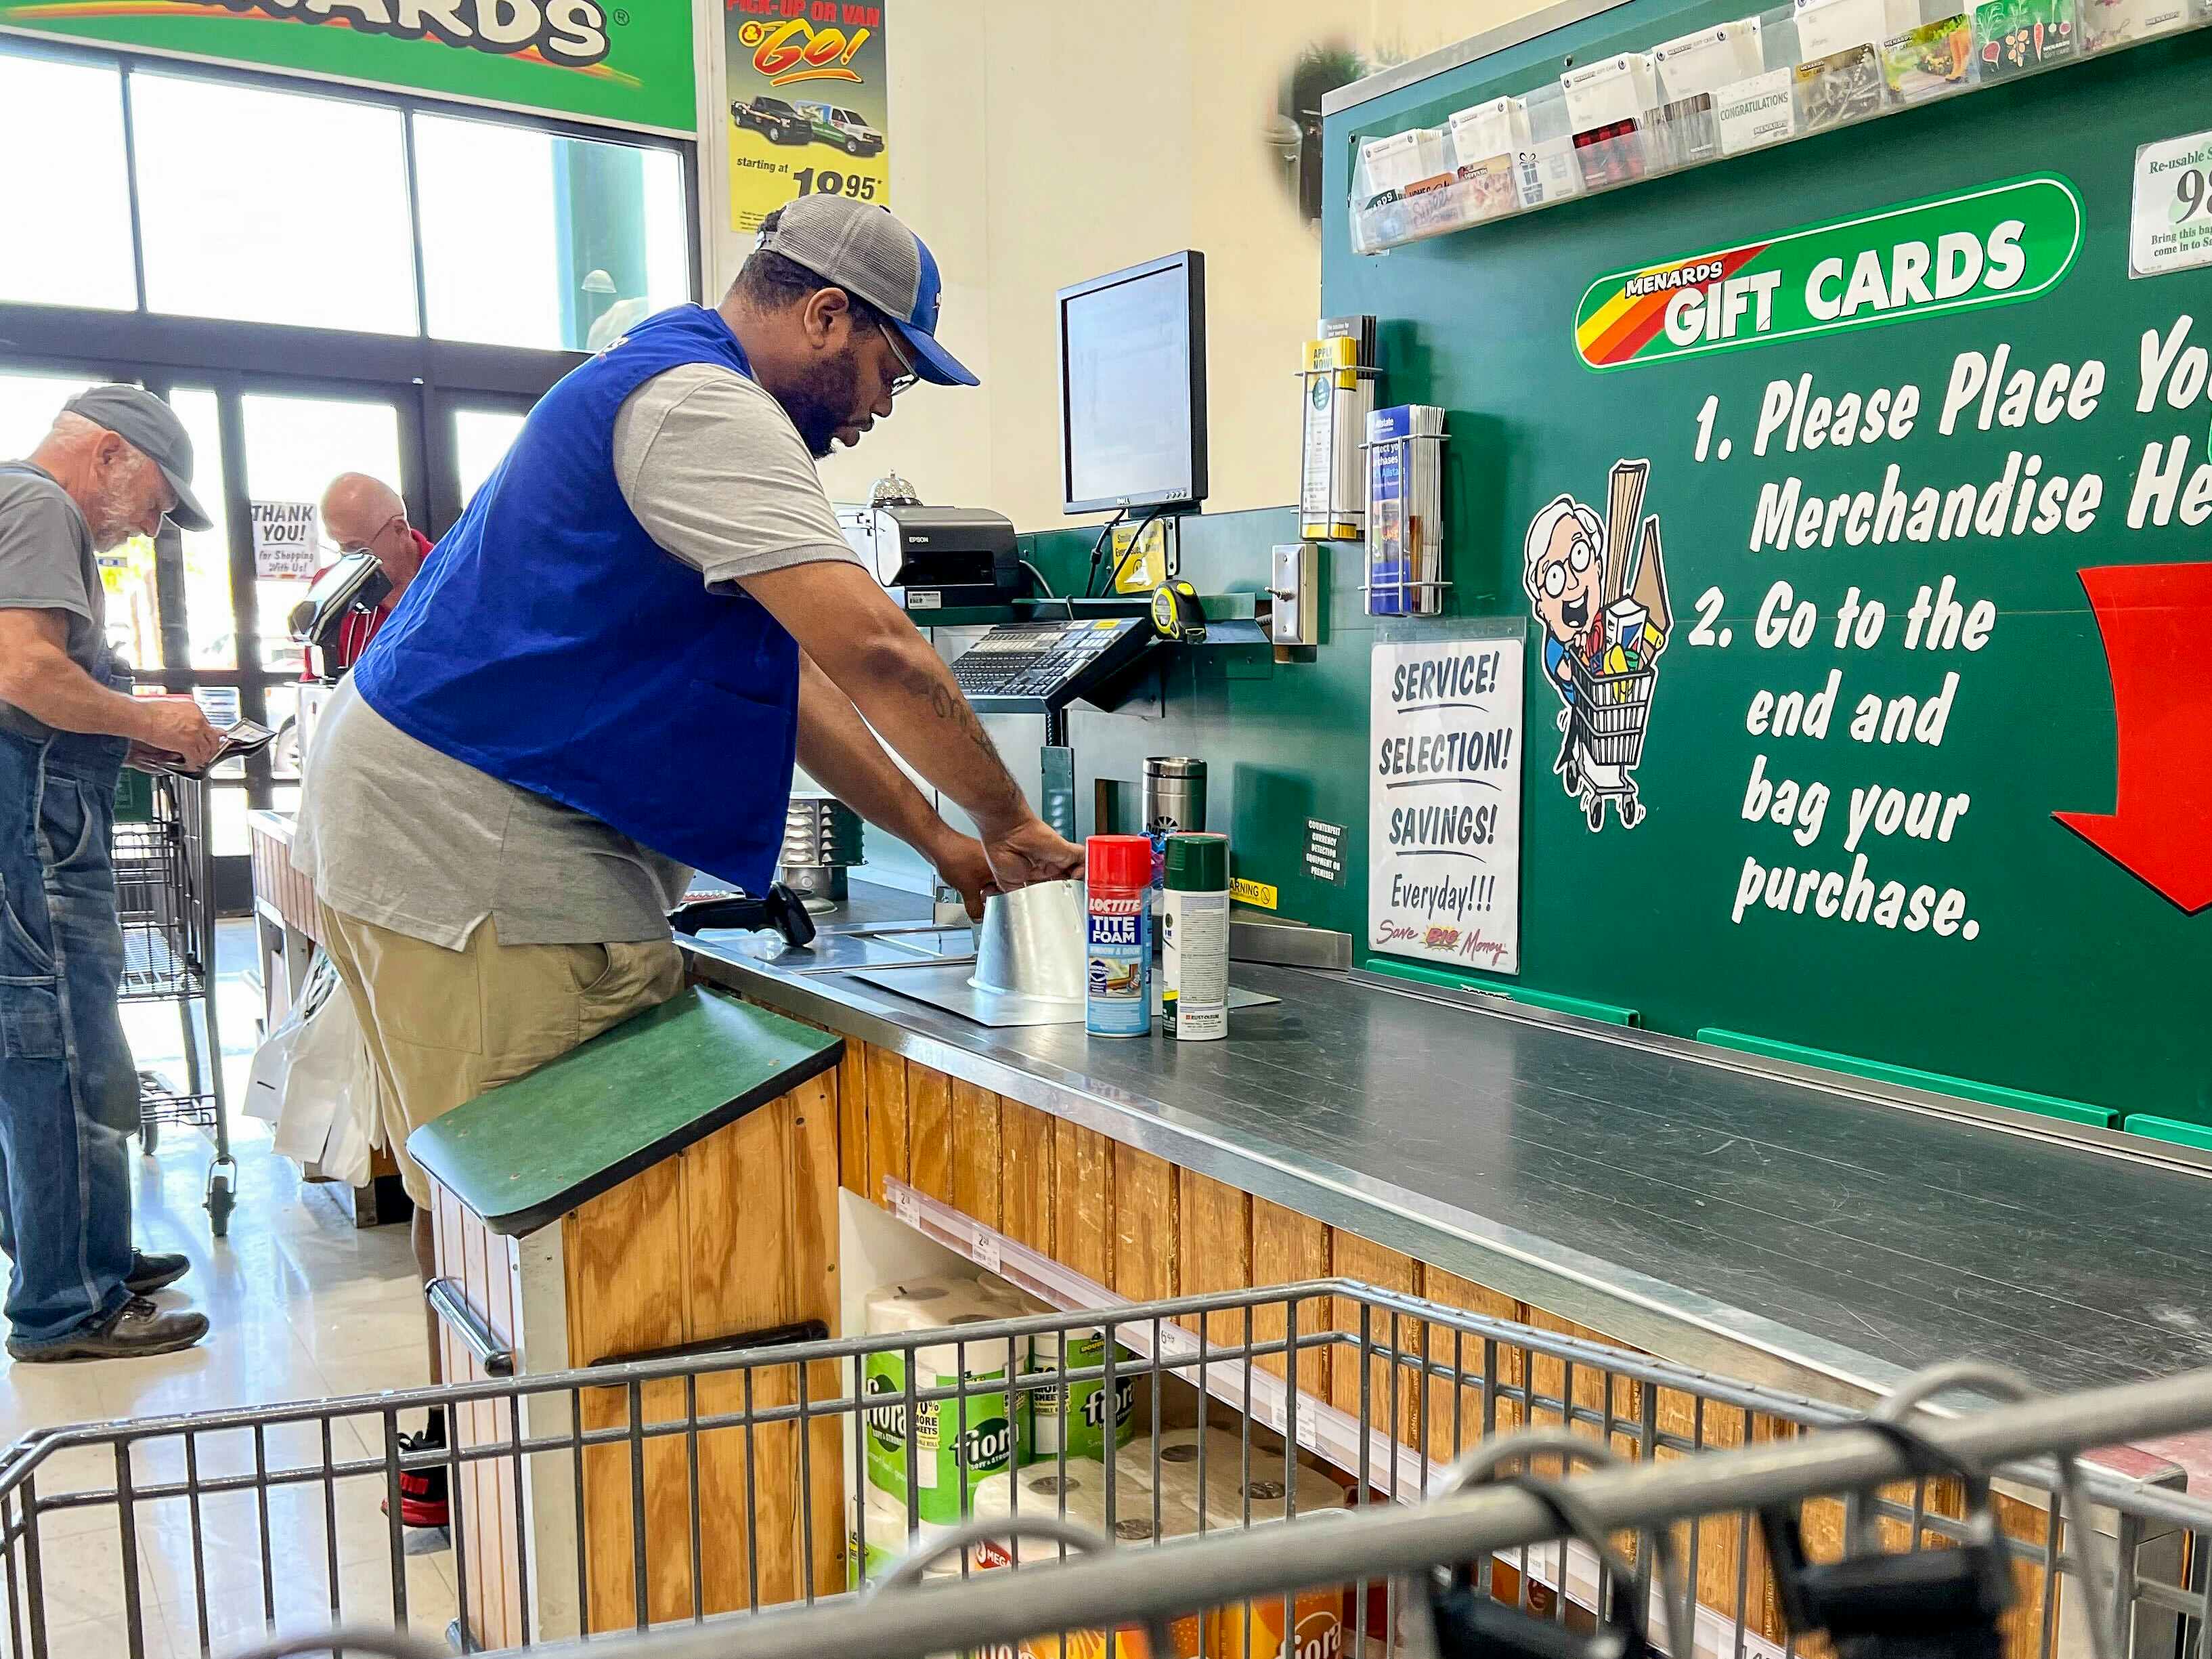 A Menards employee scanning items at the checkout lane.